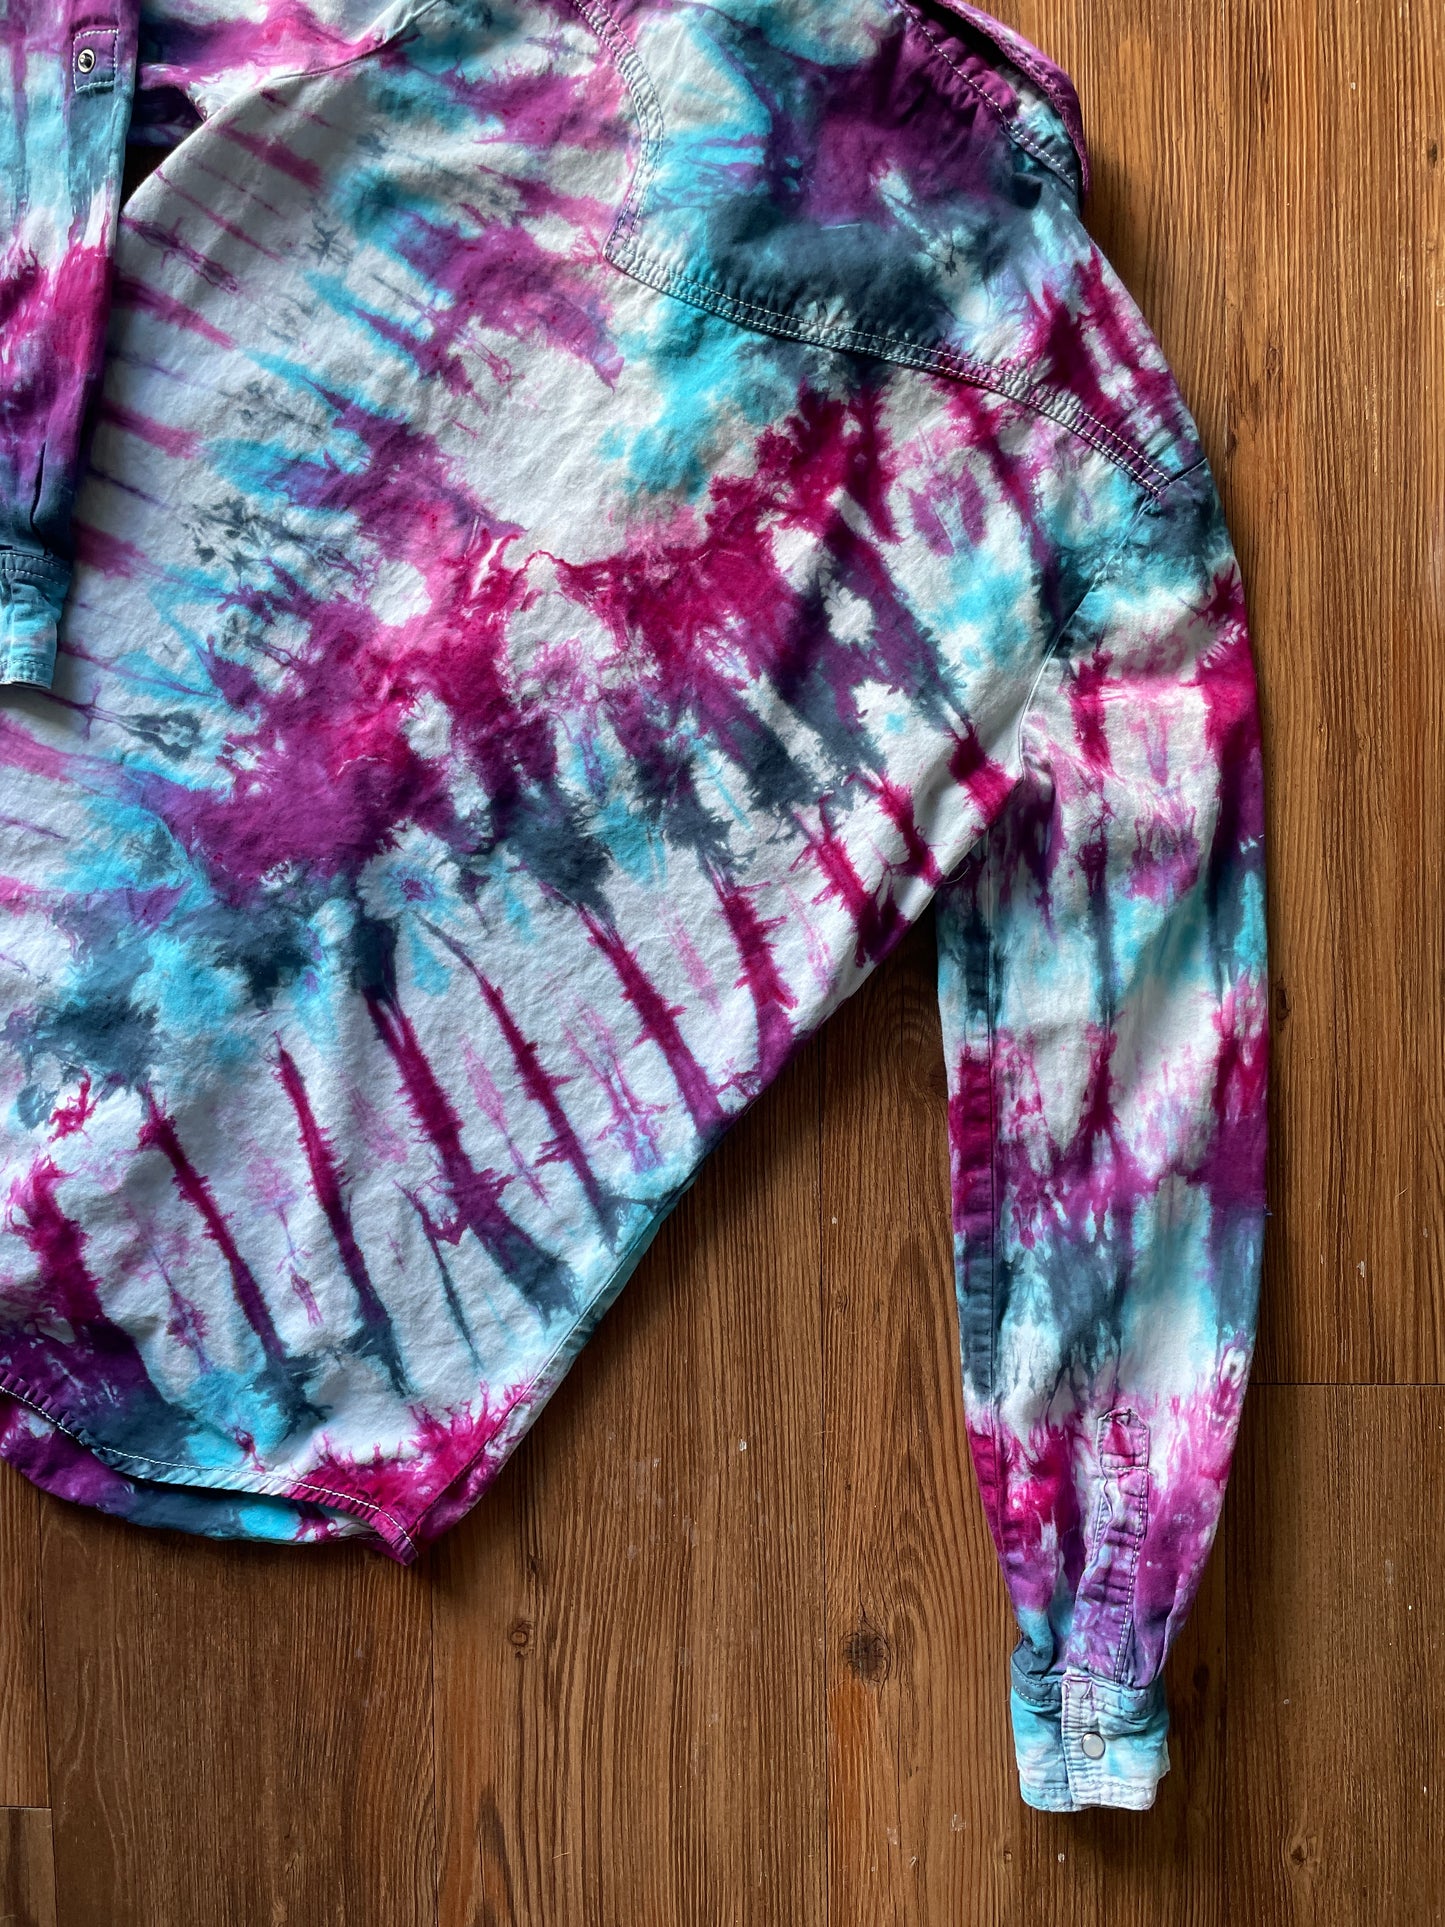 MEDIUM Women’s Handmade Tie Dye Chambray Pearl Snap Shirt | One-Of-a-Kind Blue, Purple, and Pink Pleated Long Sleeve